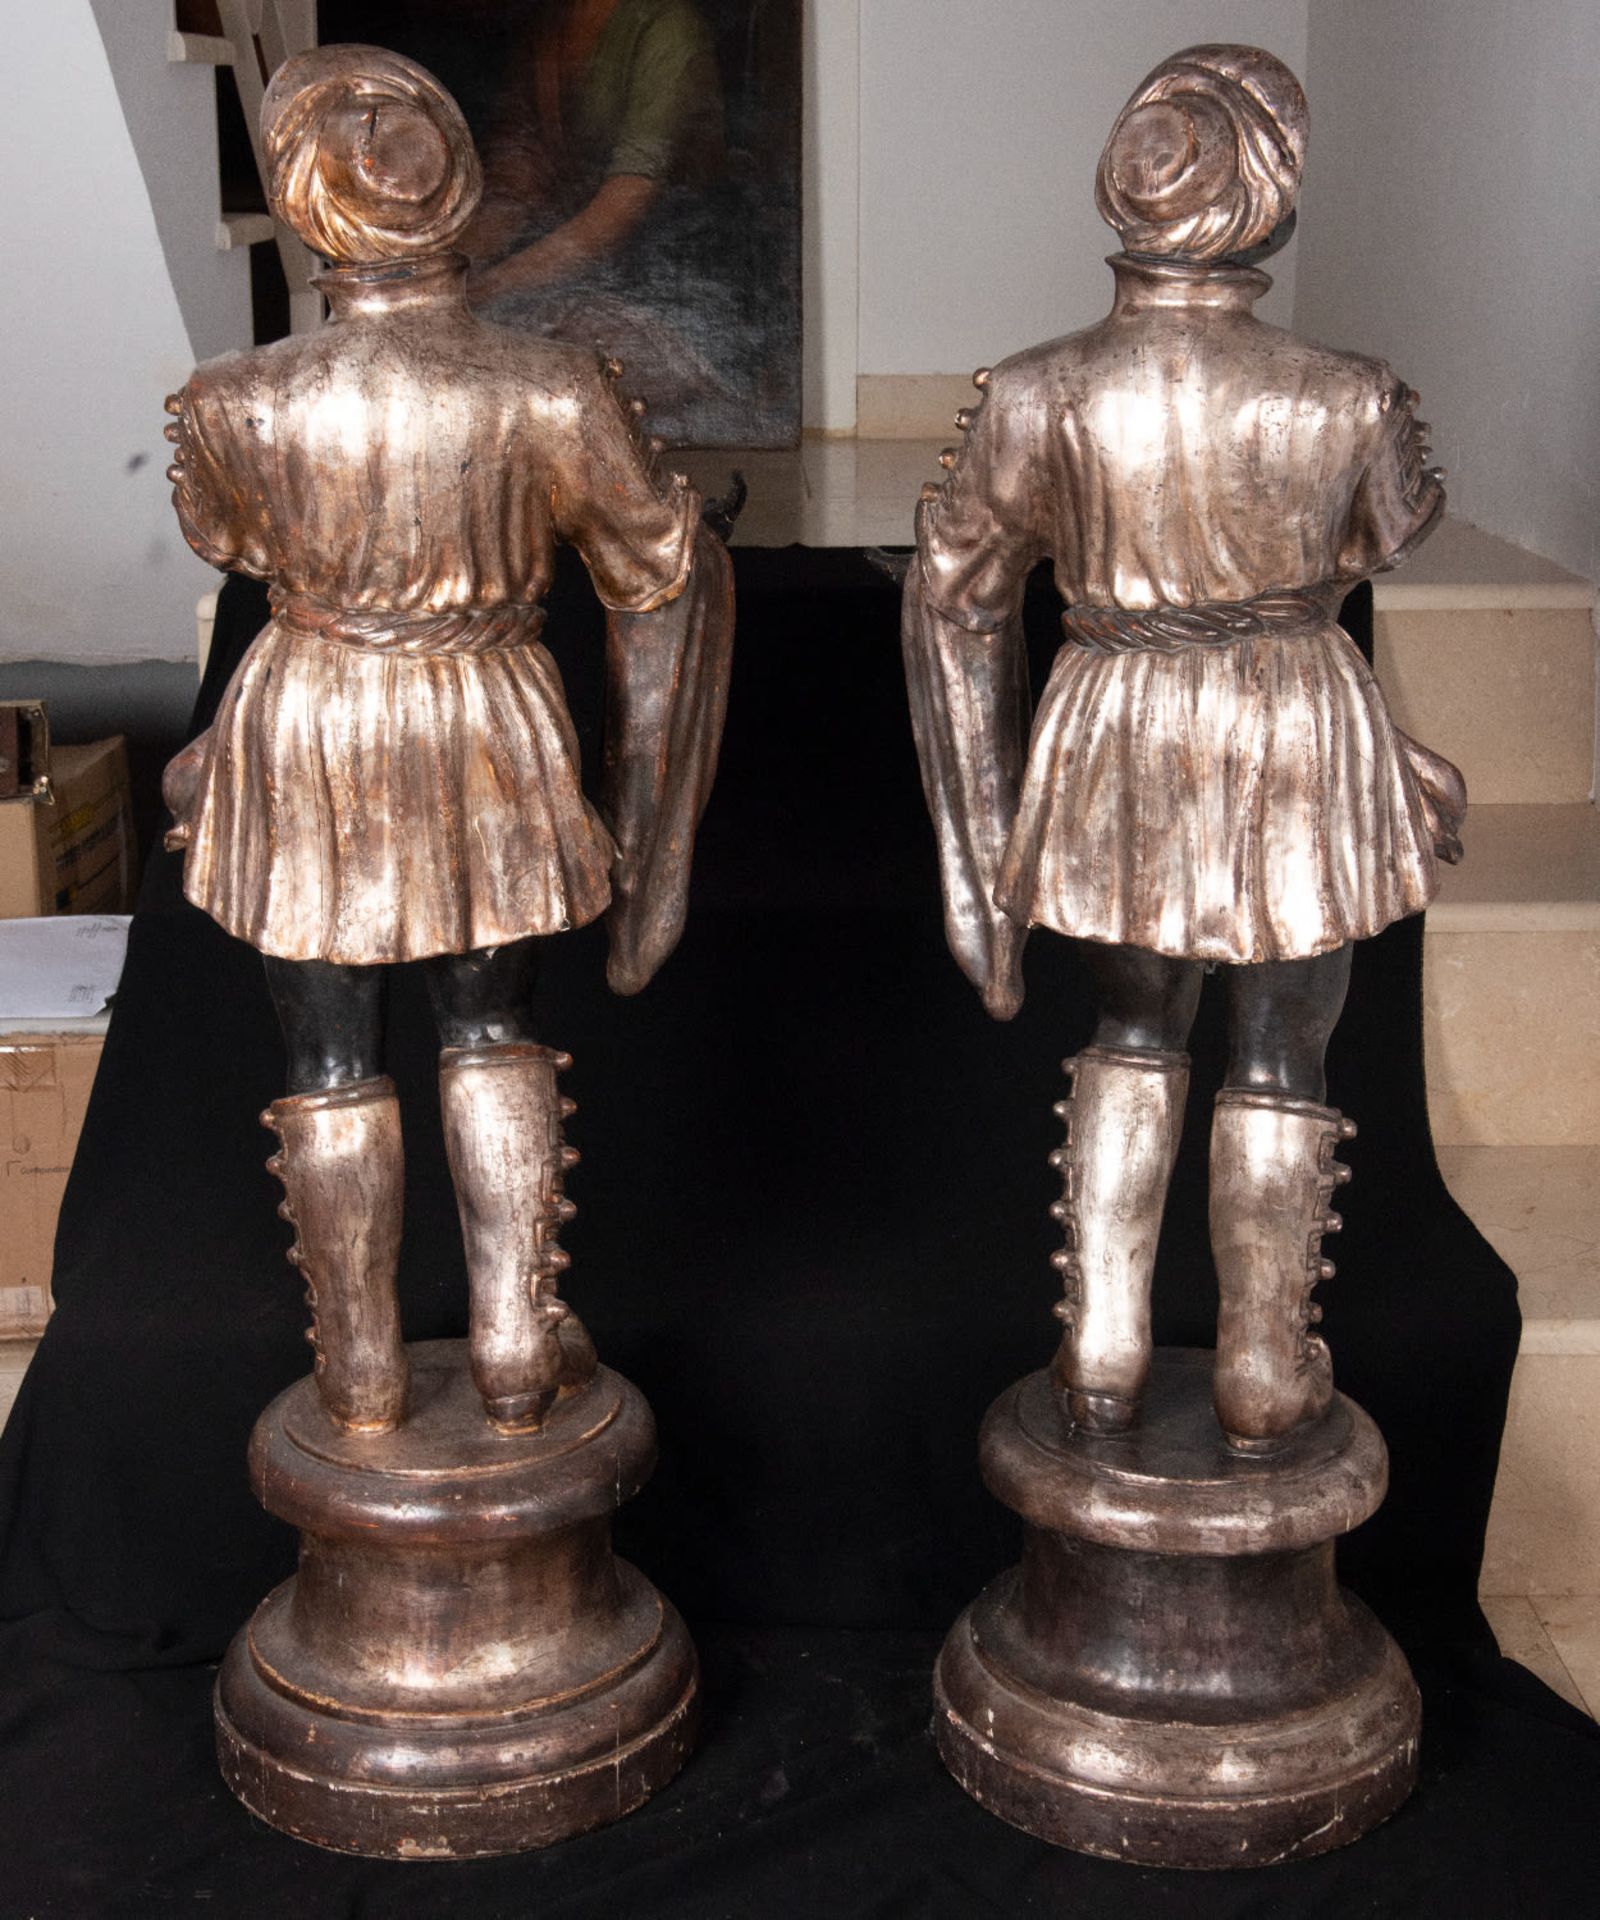 Pair of large and important Venetian "Morettos" from the late 18th century - Bild 7 aus 7